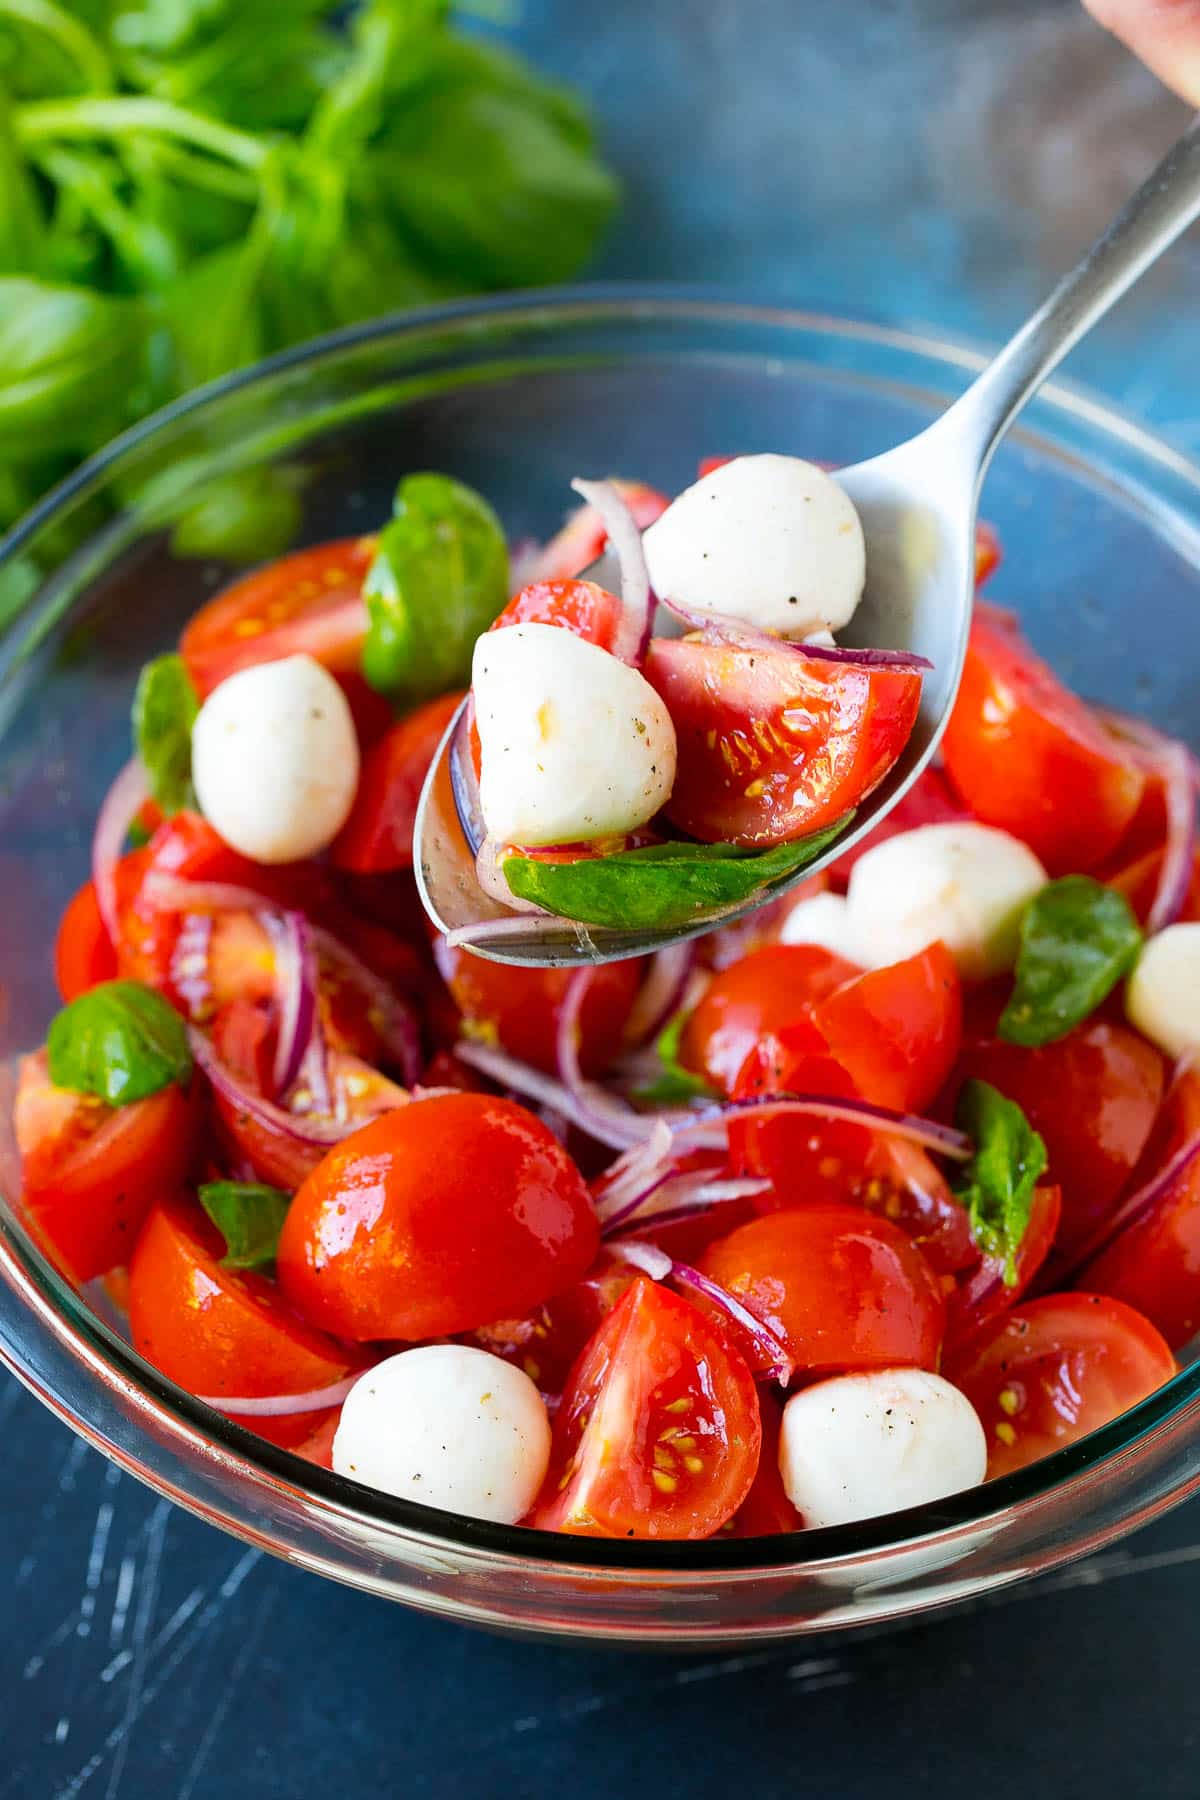 A spoon serving up a portion of tomato salad.